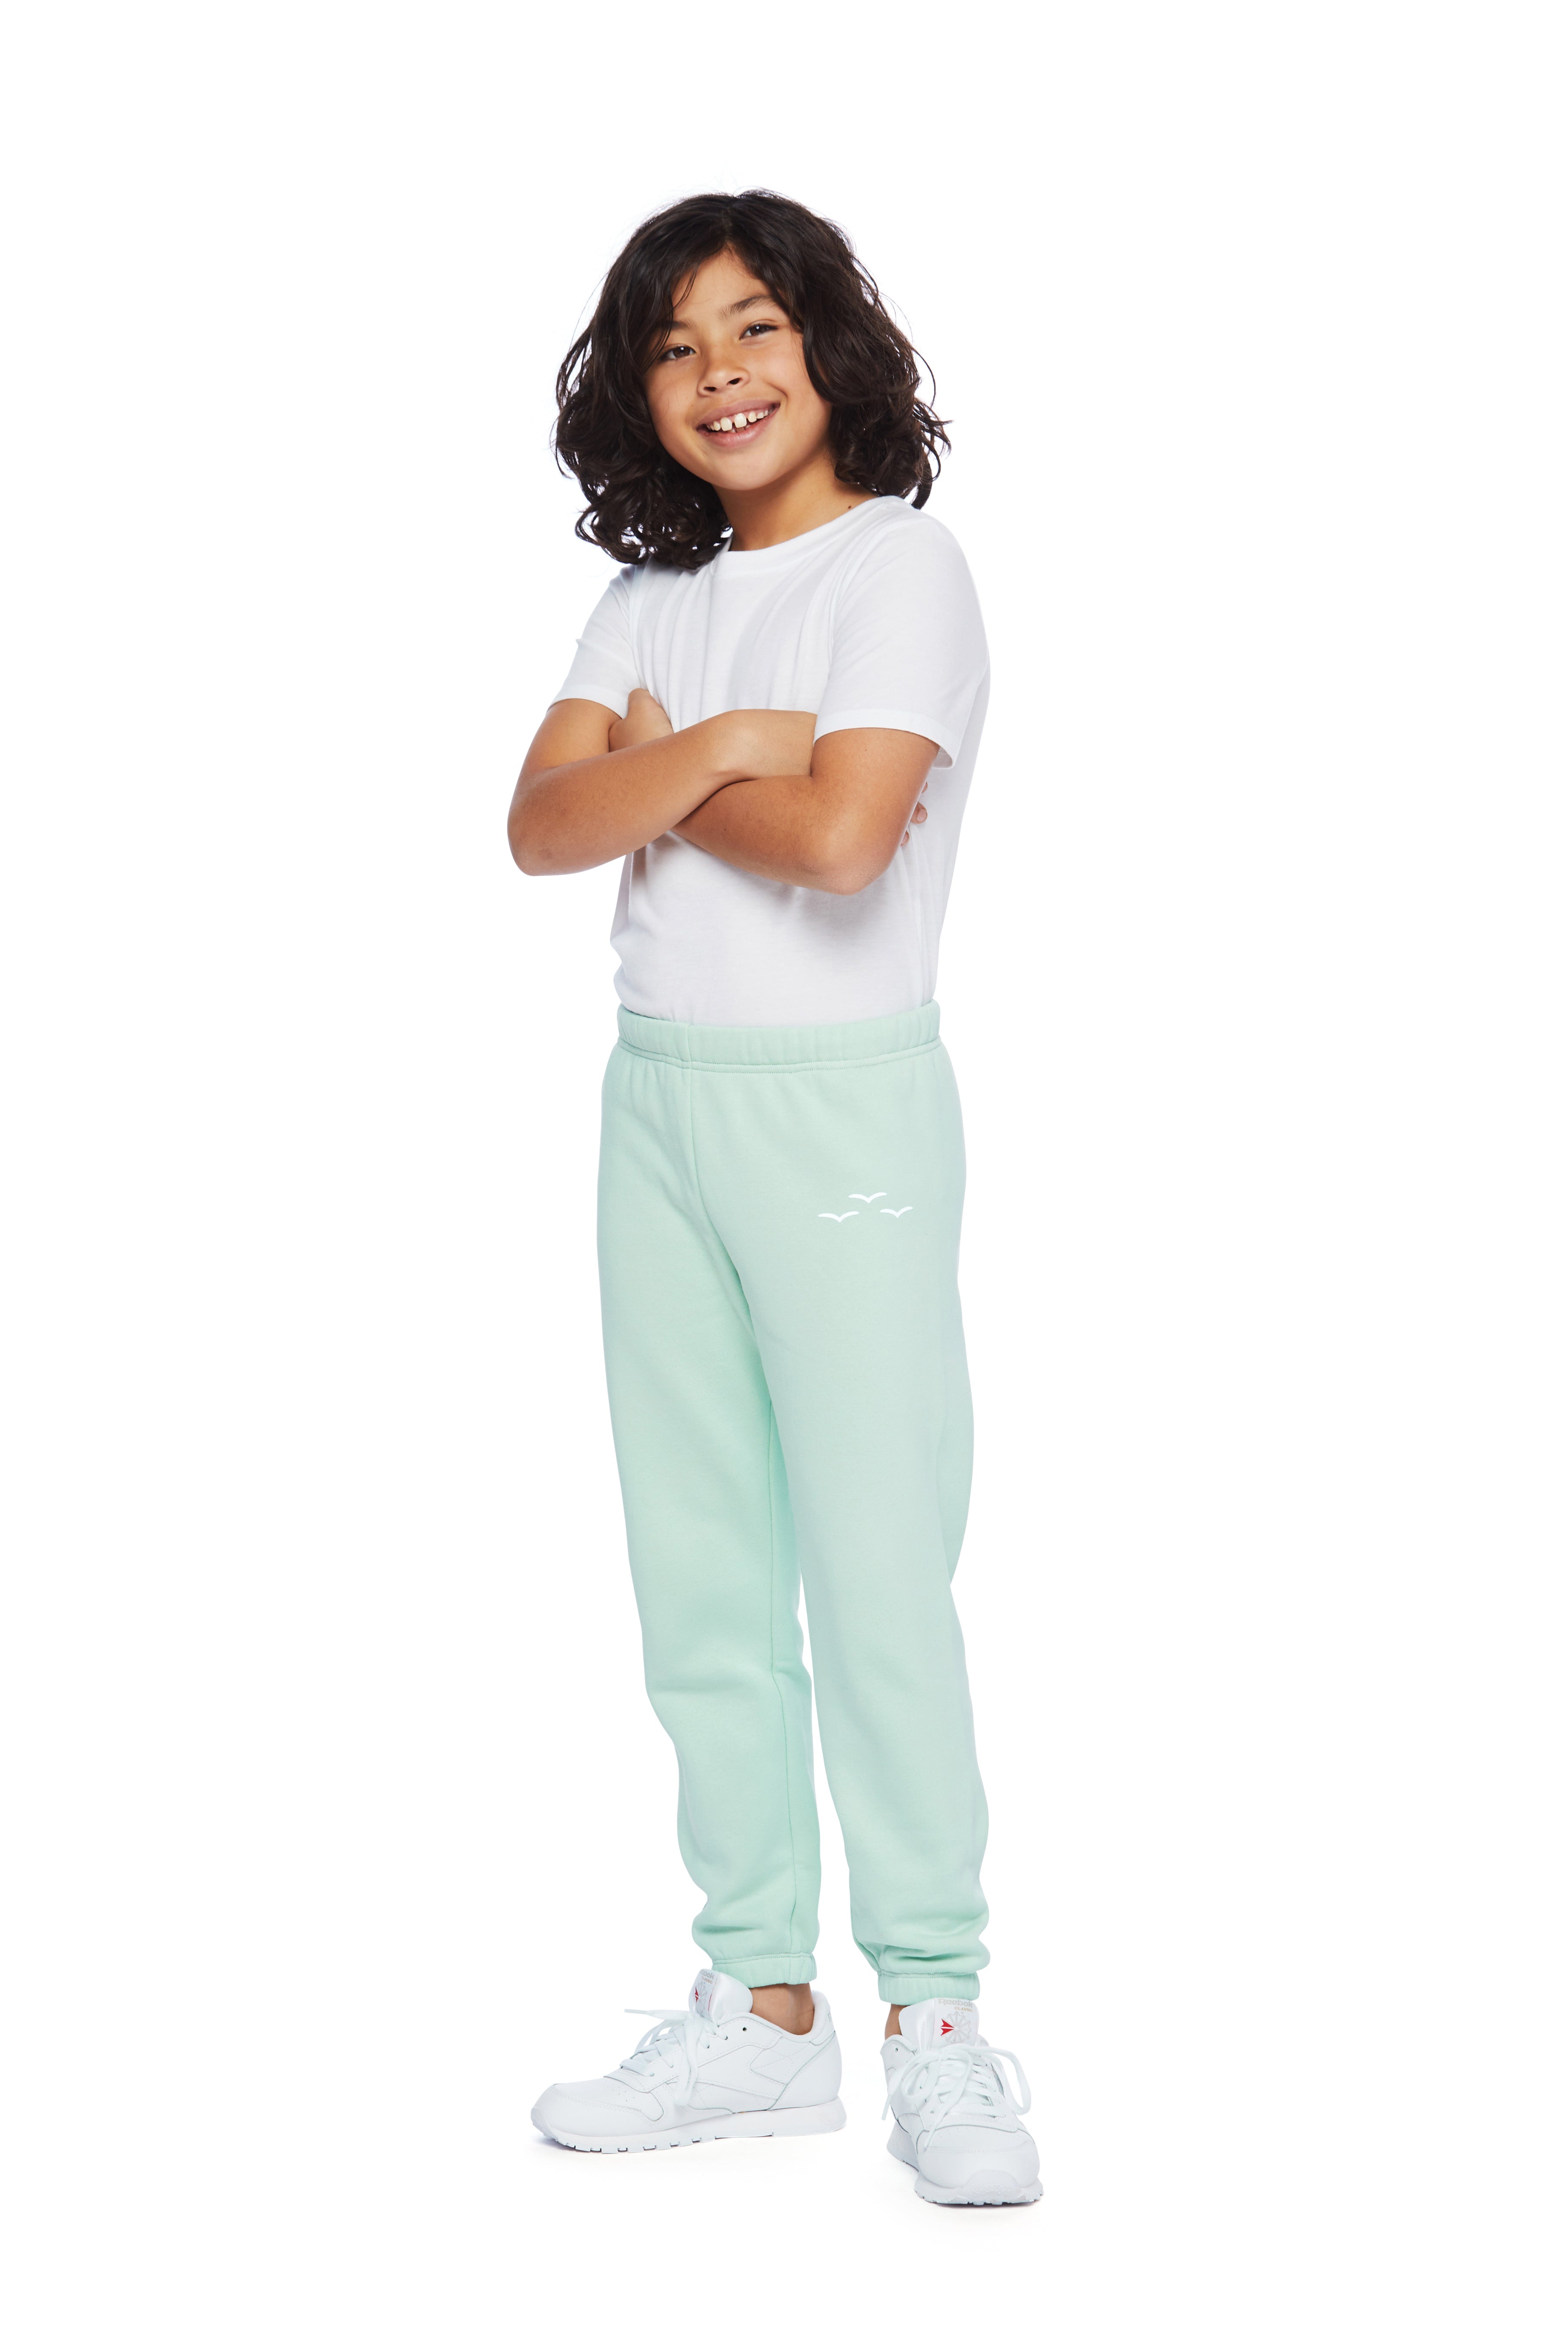 Niki Original kids sweatpants in mint from Lazypants - always a great buy at a reasonable price.